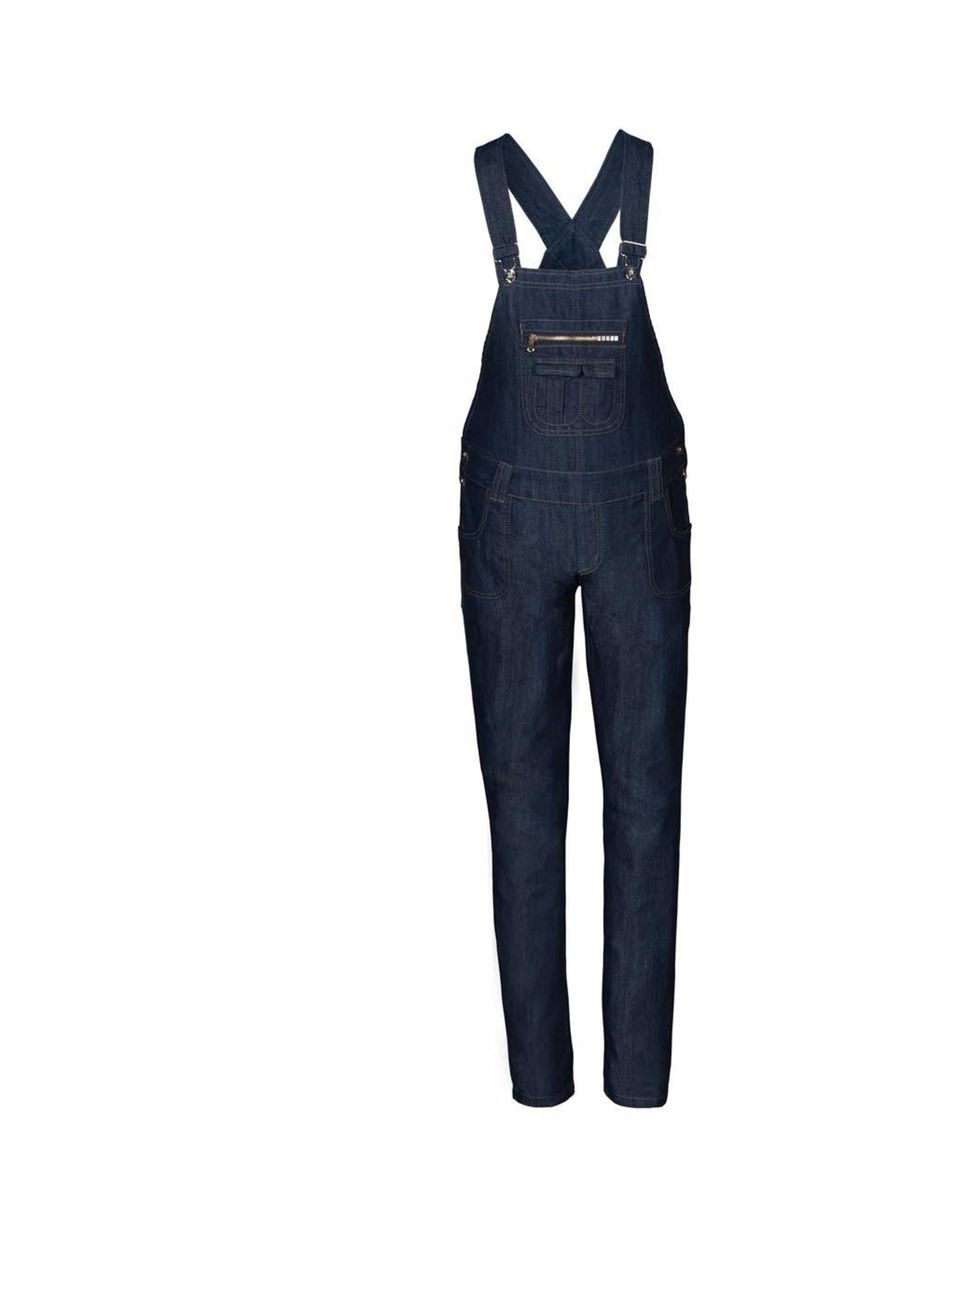 <p>Blue denim dungarees £39 <a href="http://uk.dungarees-online.com/women/skinny-fit-dungarees/womens-skinny-fit-dungarees-blue.html">Dungarees Online</a></p>